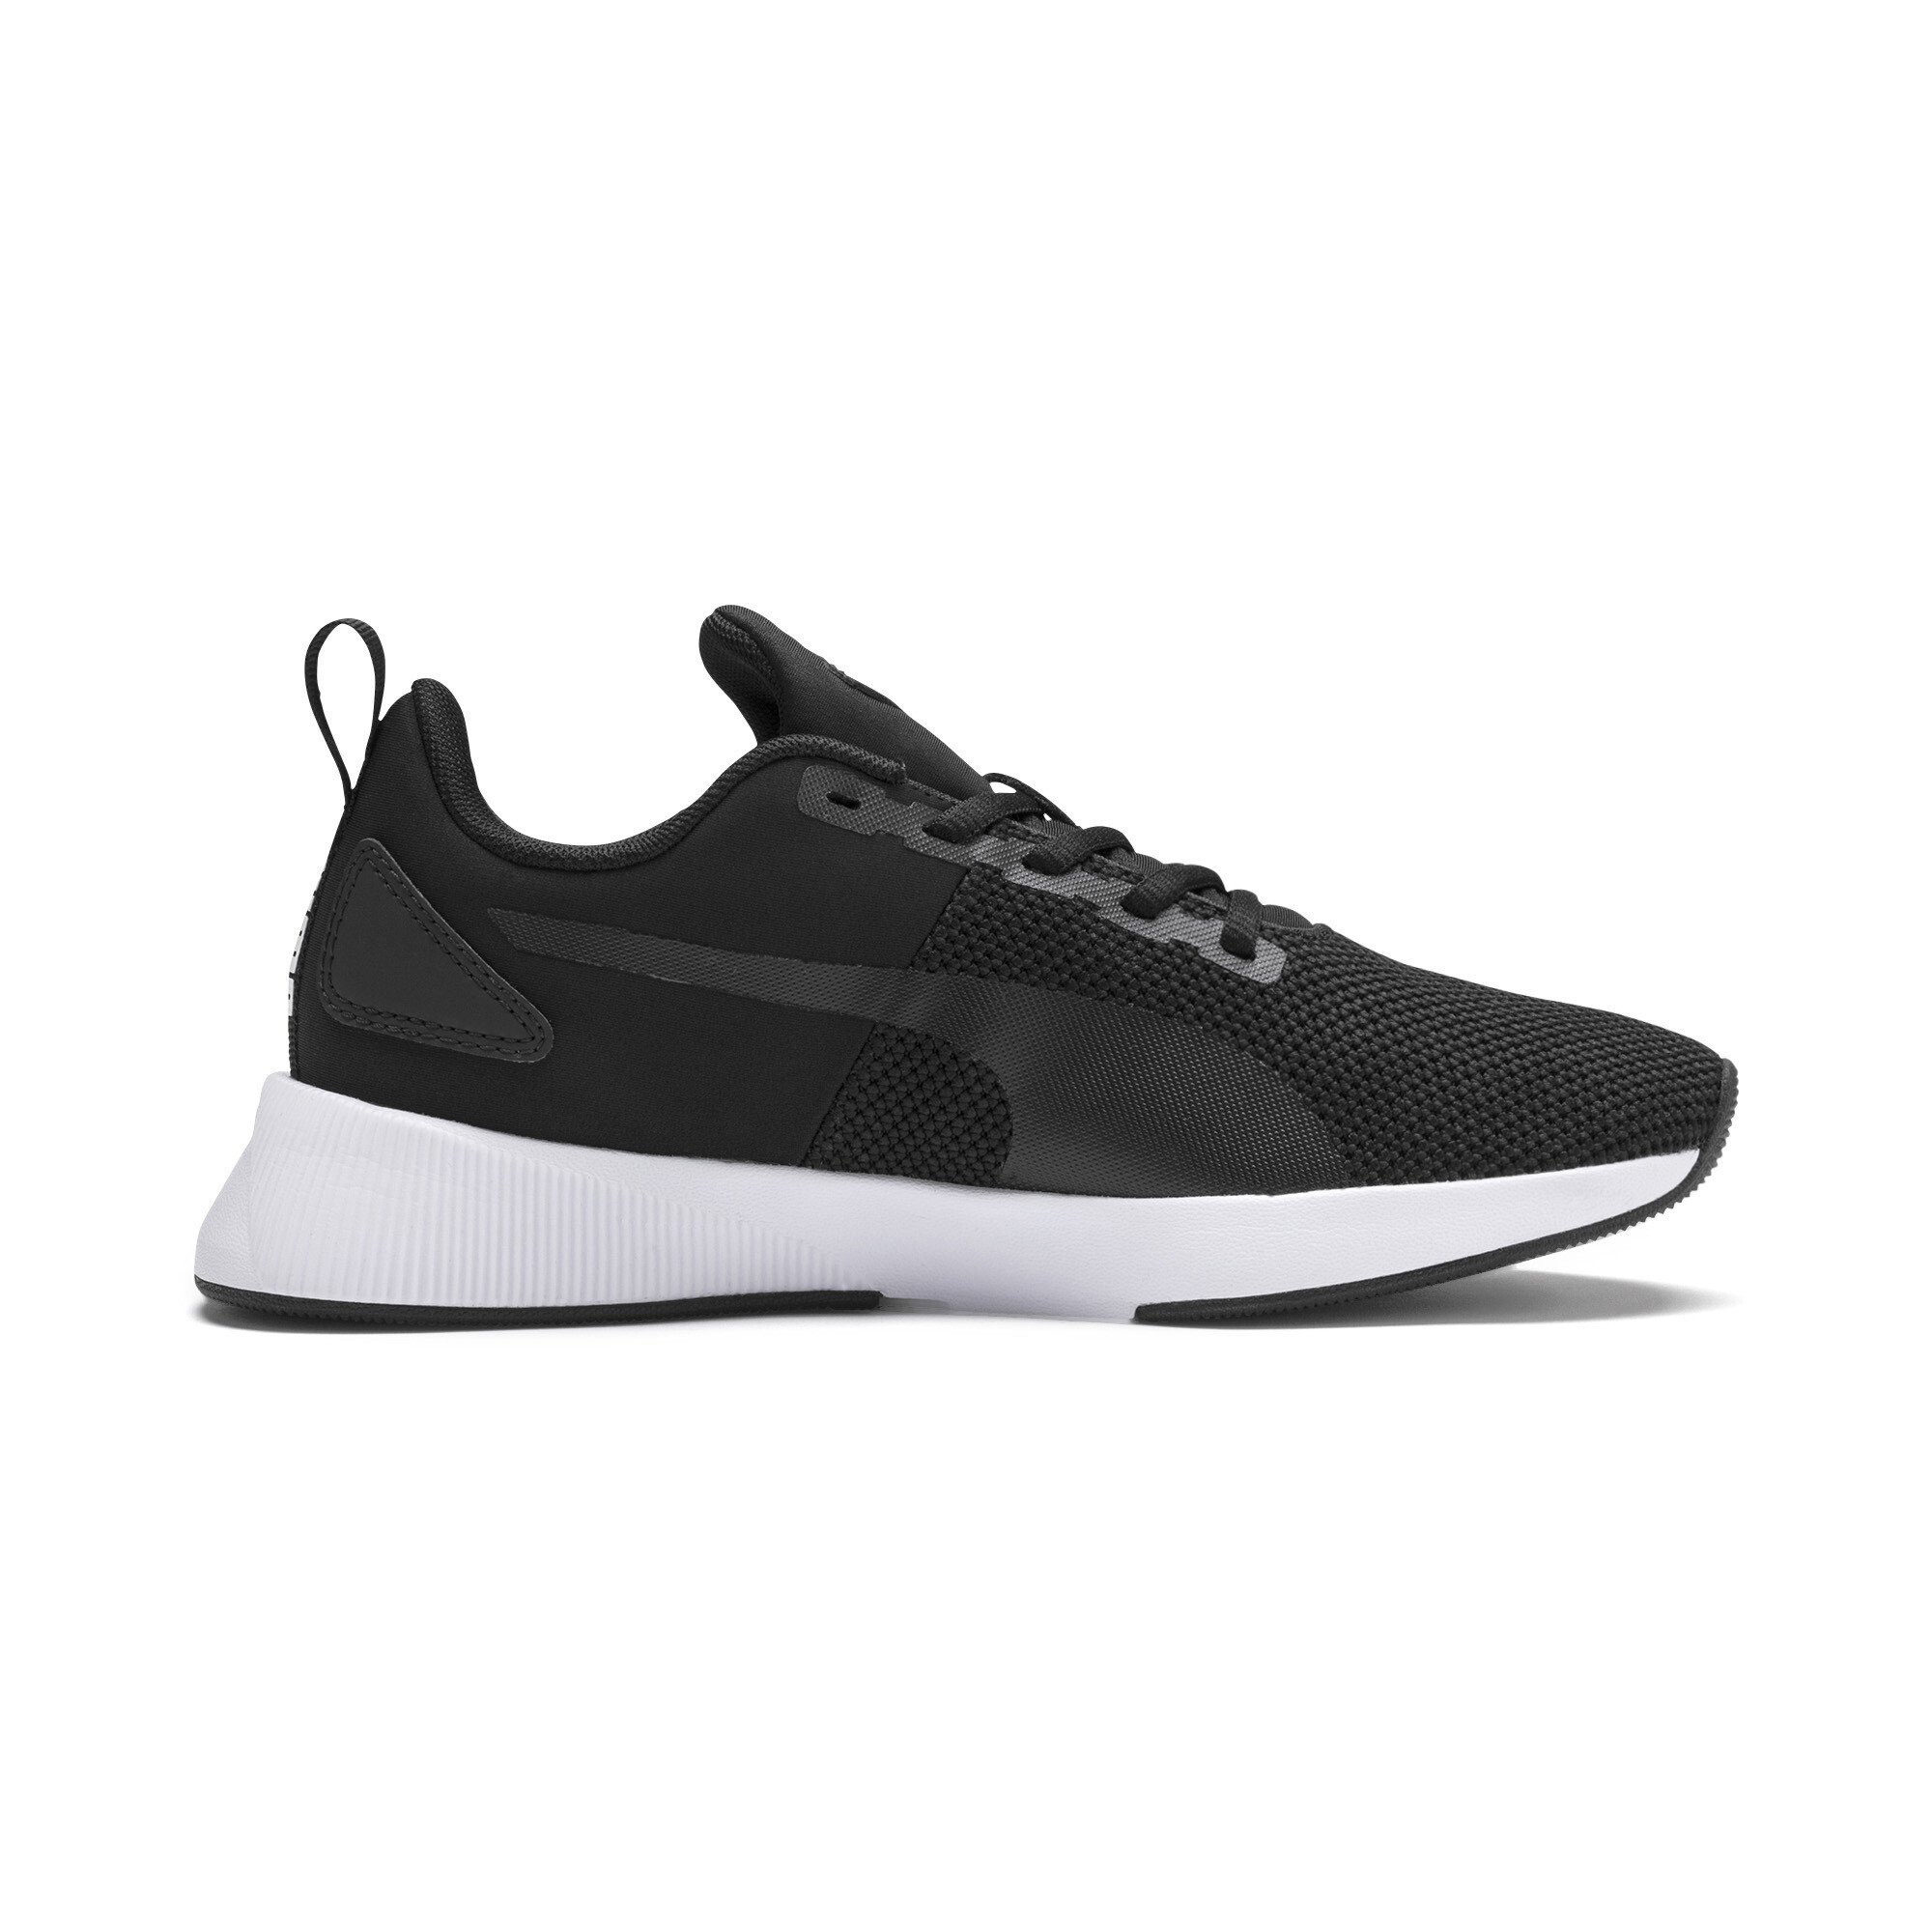 PUMA Flyer Runner Youth Trainers In 10 - Black, Size EU 38